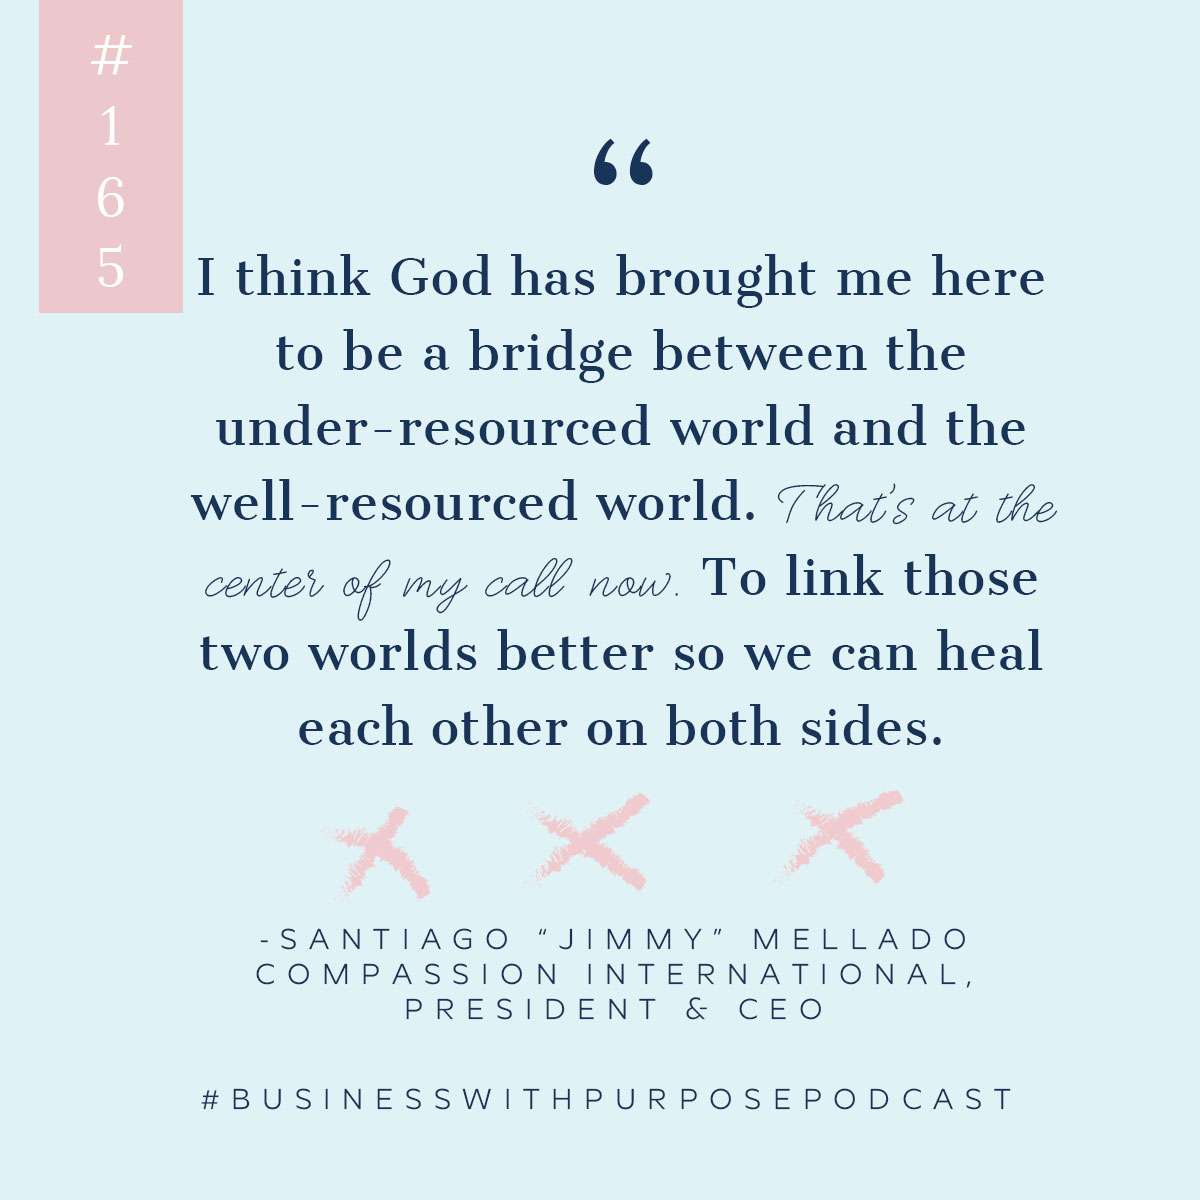 A Bridge of Compassion to Fighting Poverty & Fighting Plenty | Business with Purpose Podcast EP 165: Santiago "Jimmy" Mellado, Compassion International President & CEO